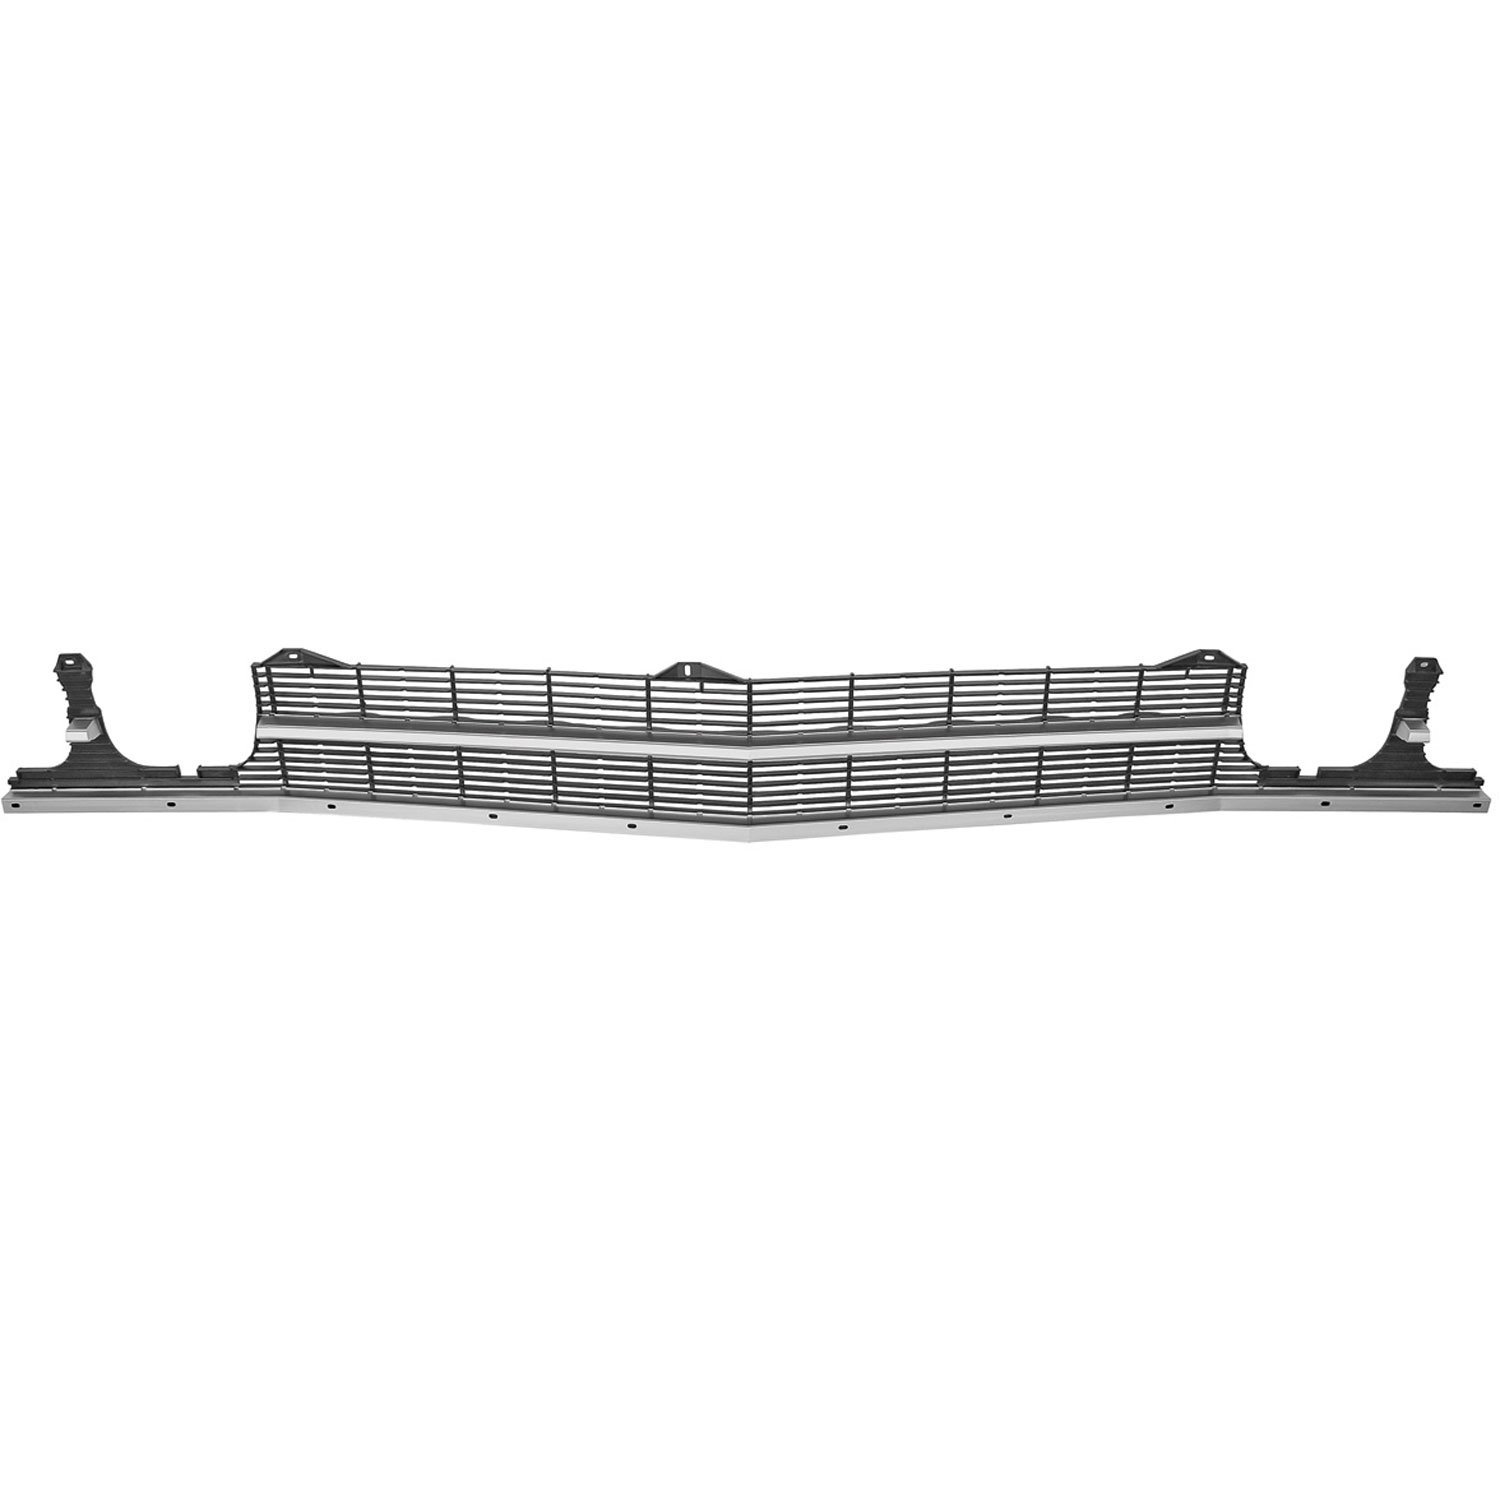 Grille for 1969 Chevrolet Chevelle/El Camino [w/o Molding Holes]